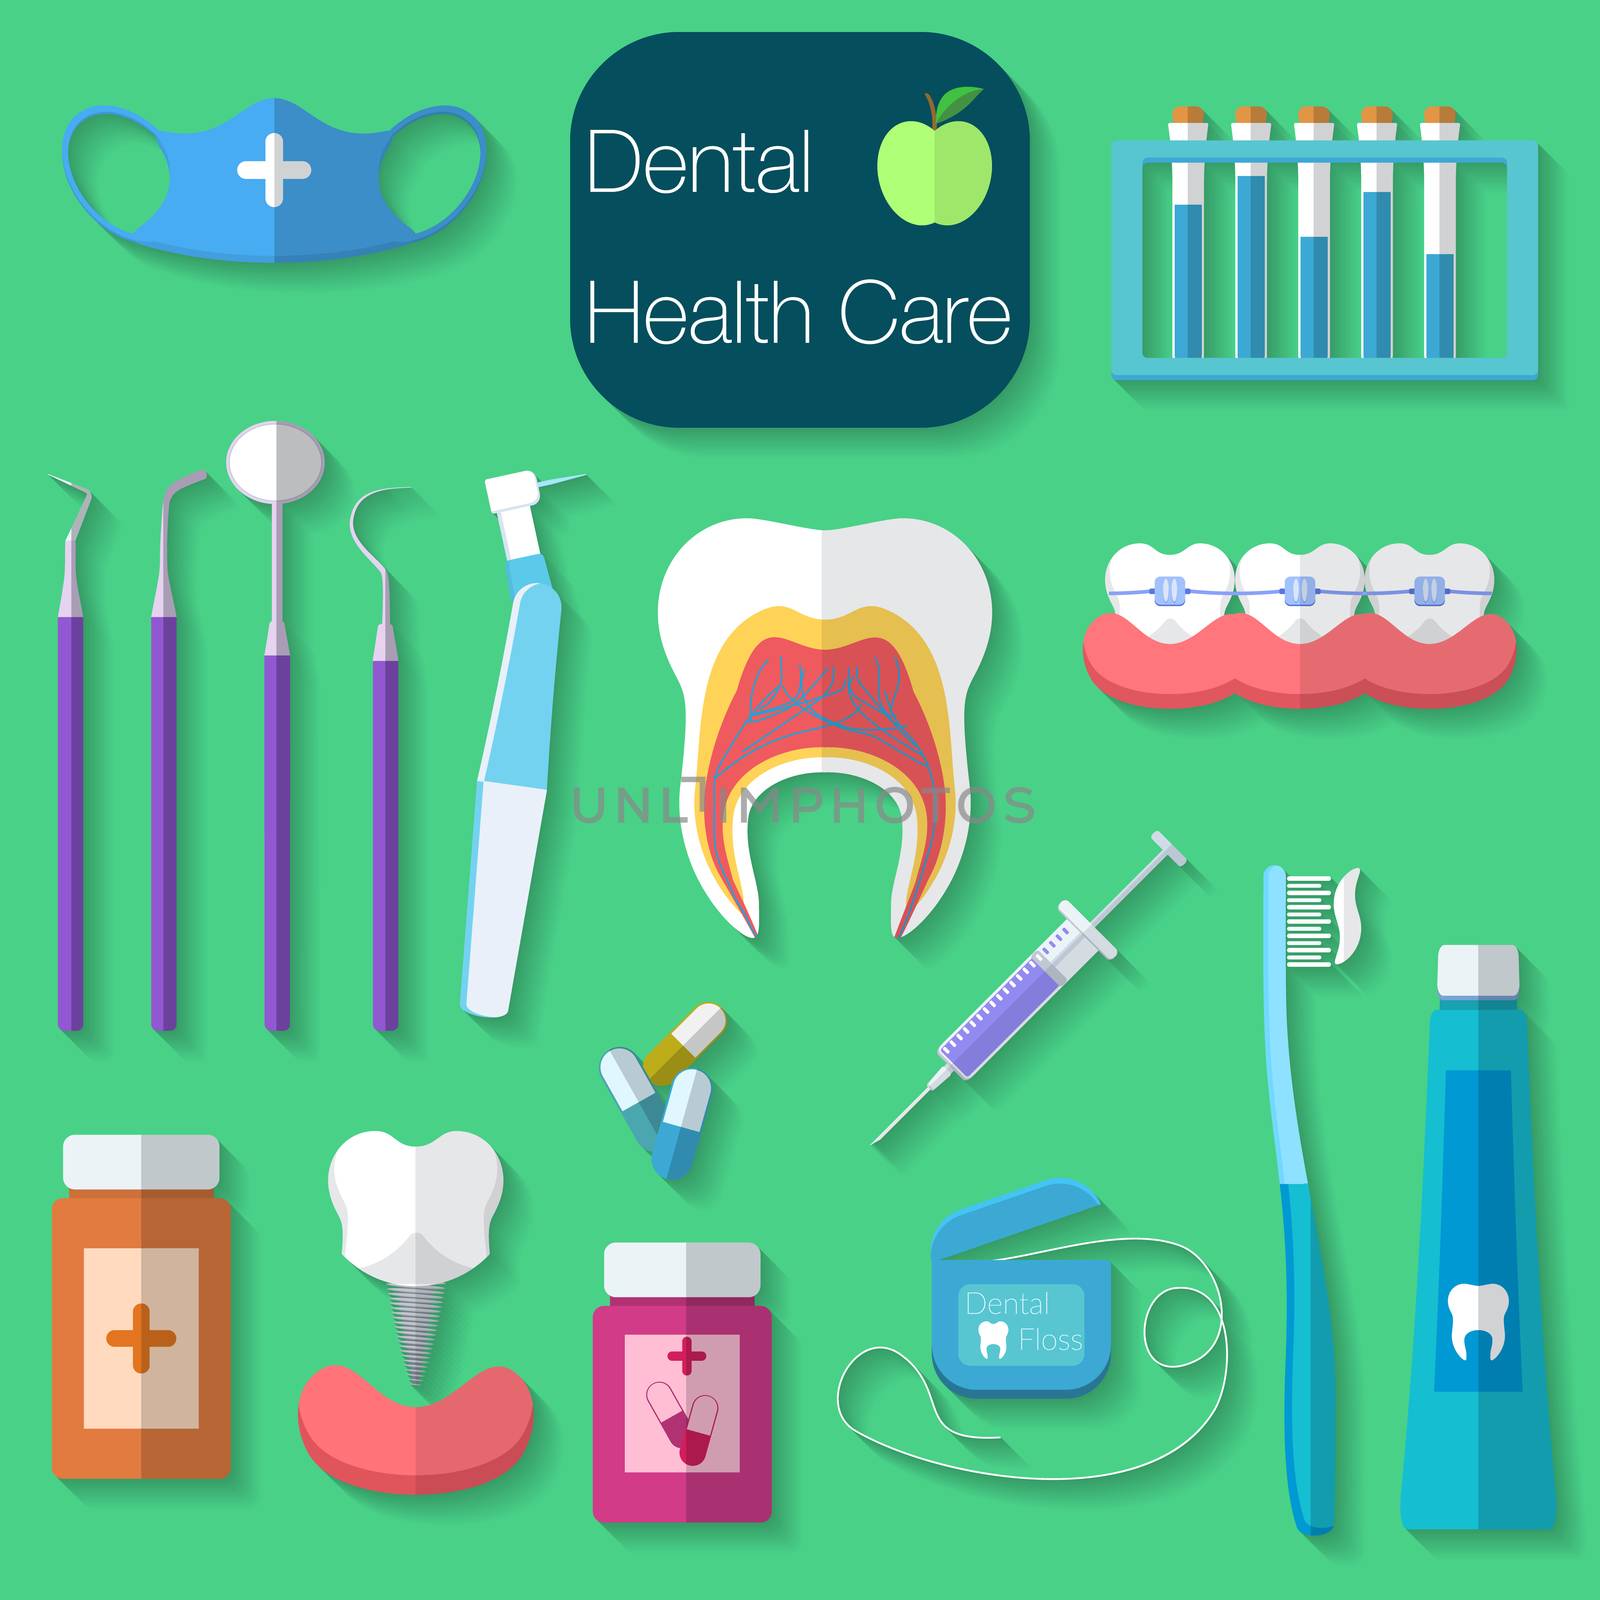 Dental care flat design Vector illustration with Dental floss, teeth, mouth, tooth paste and brush, medicine, syringe and dentist instruments.